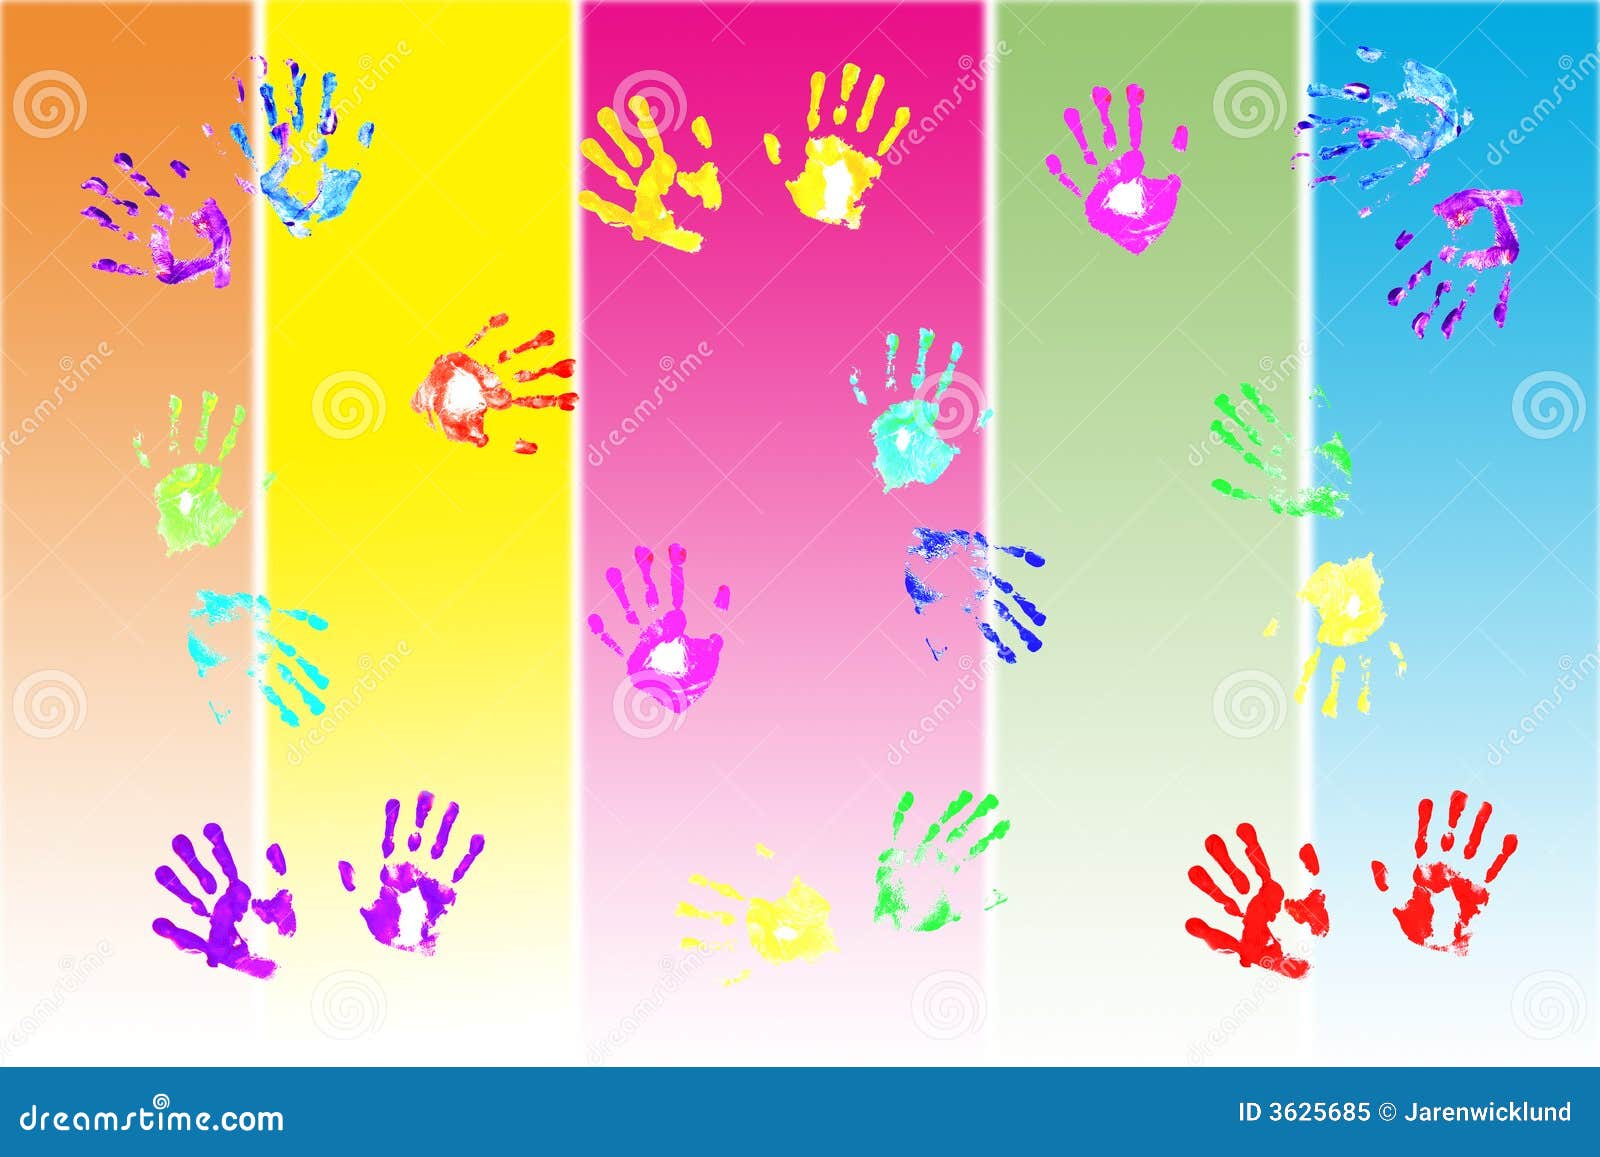 Colorful Handprints By Kids Royalty Free Stock Photo ...